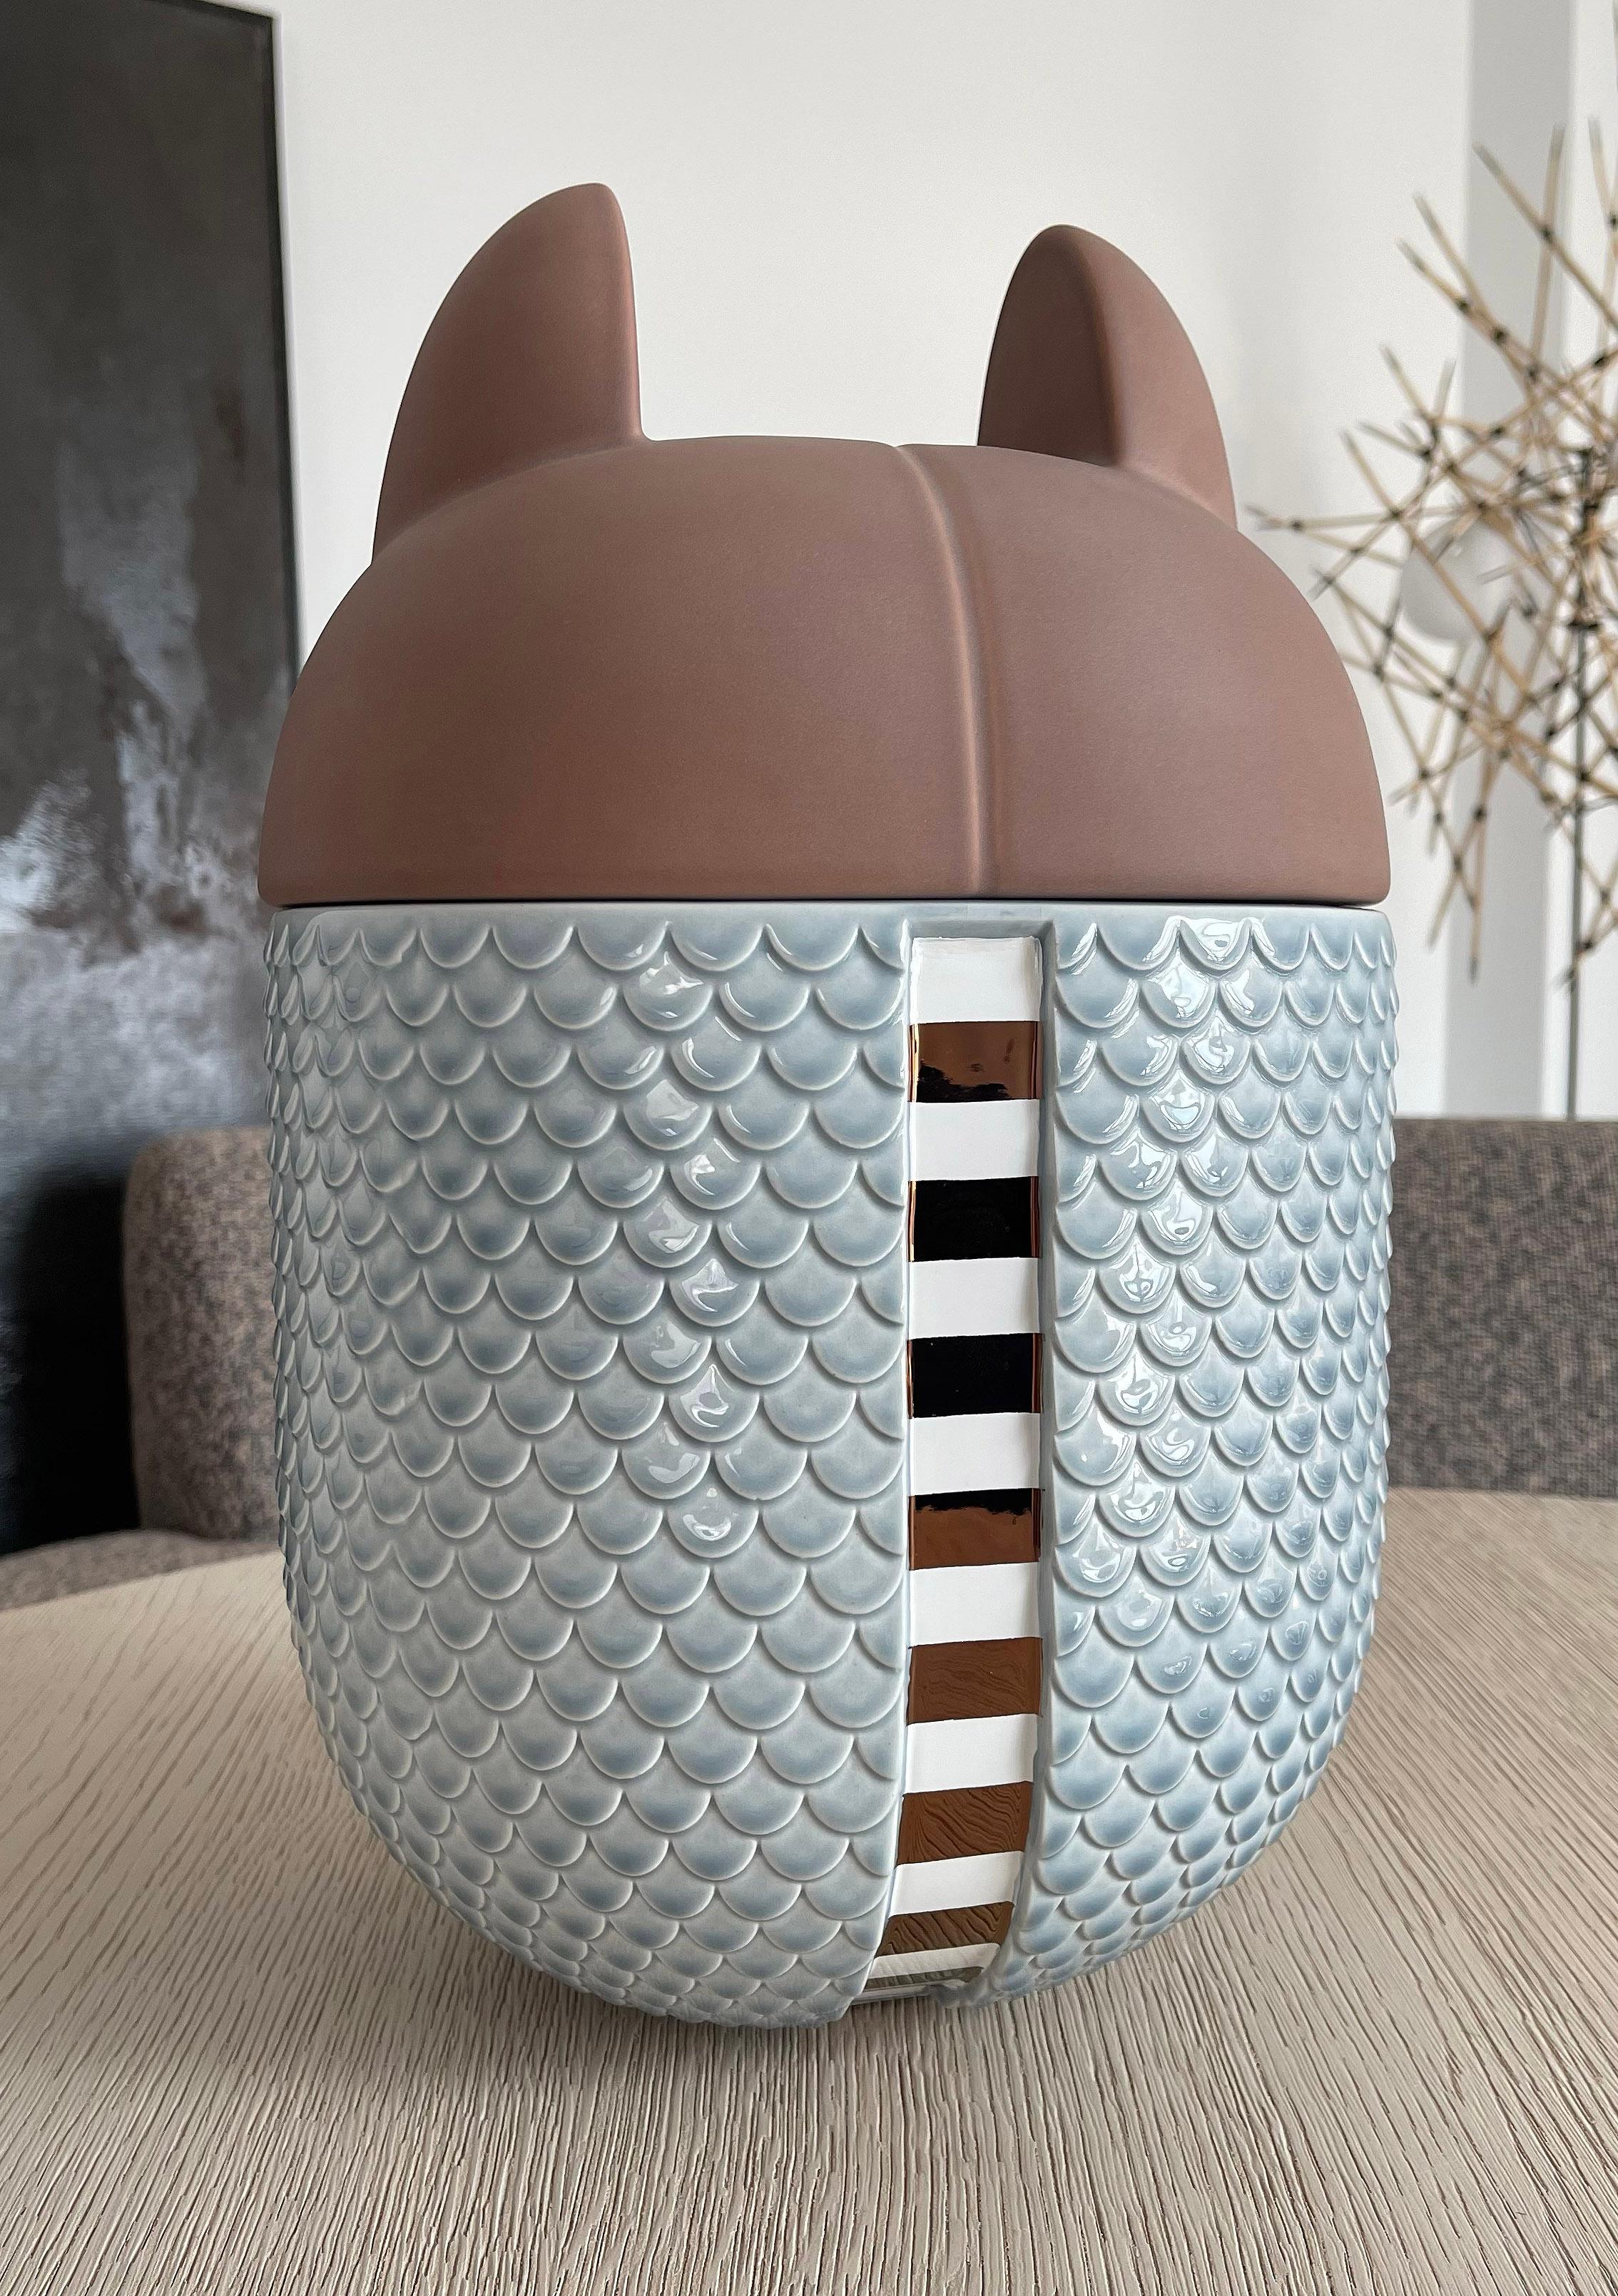 Ceramic Vase / Container - Animalità Khepri by Elena Salmistraro for Bosa

Khepri designed by Elena Salmistraro for Bosa is an armadillo shaped container / vase in ceramic enriched with precious metals, with a symbolic meaning that lies in its